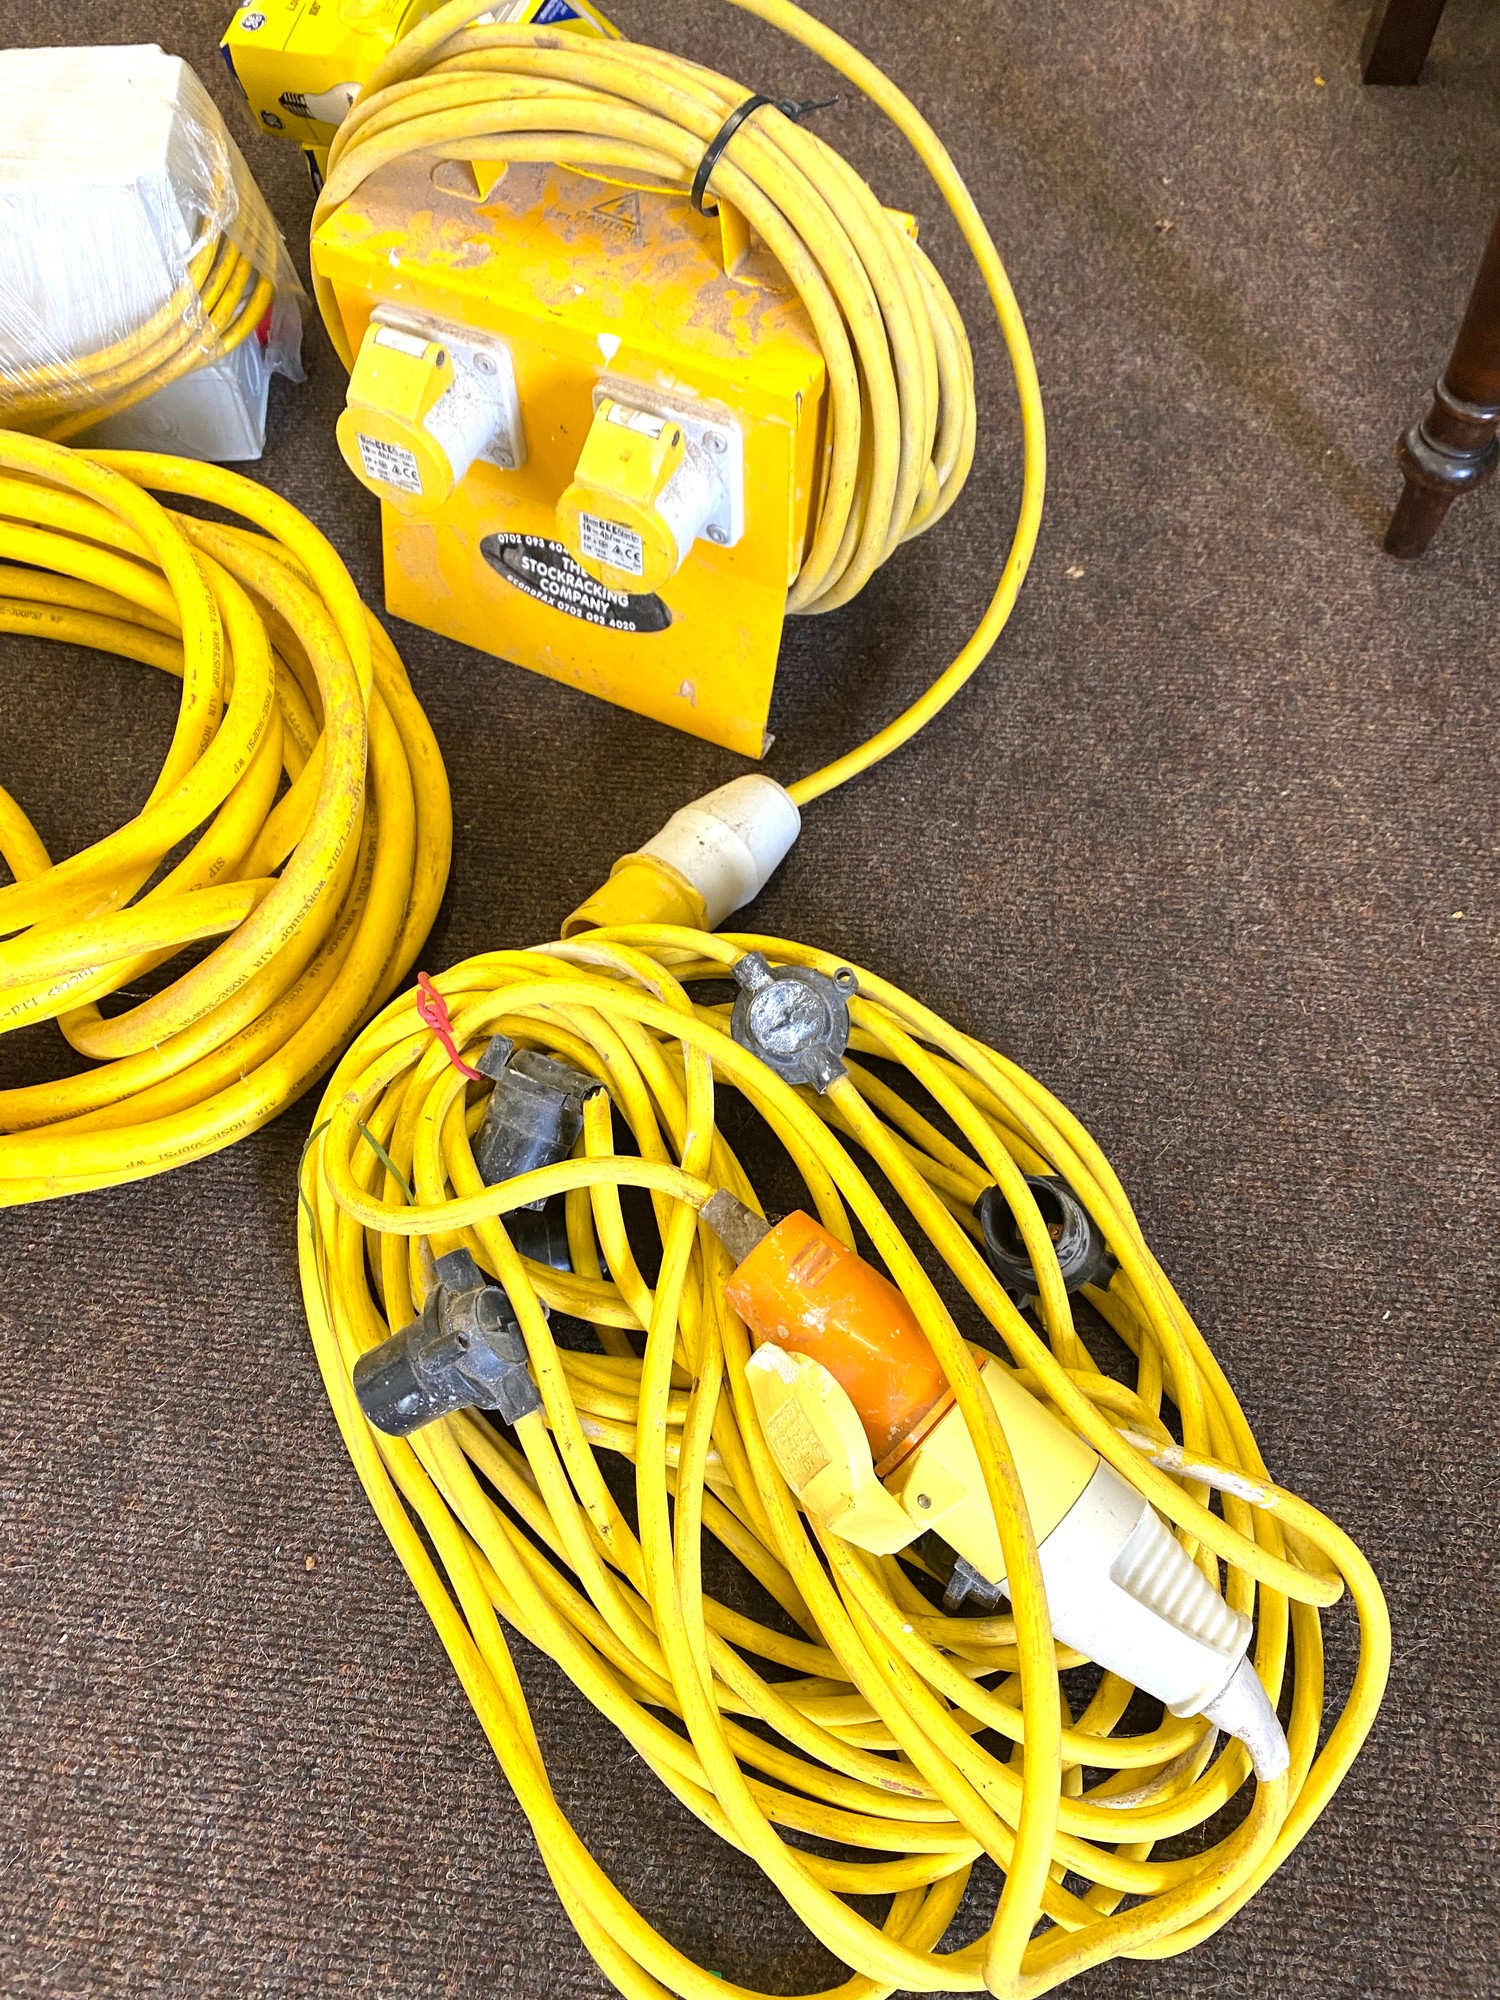 Selection of 110v extention leads, light leads, air hose etc - Image 2 of 3